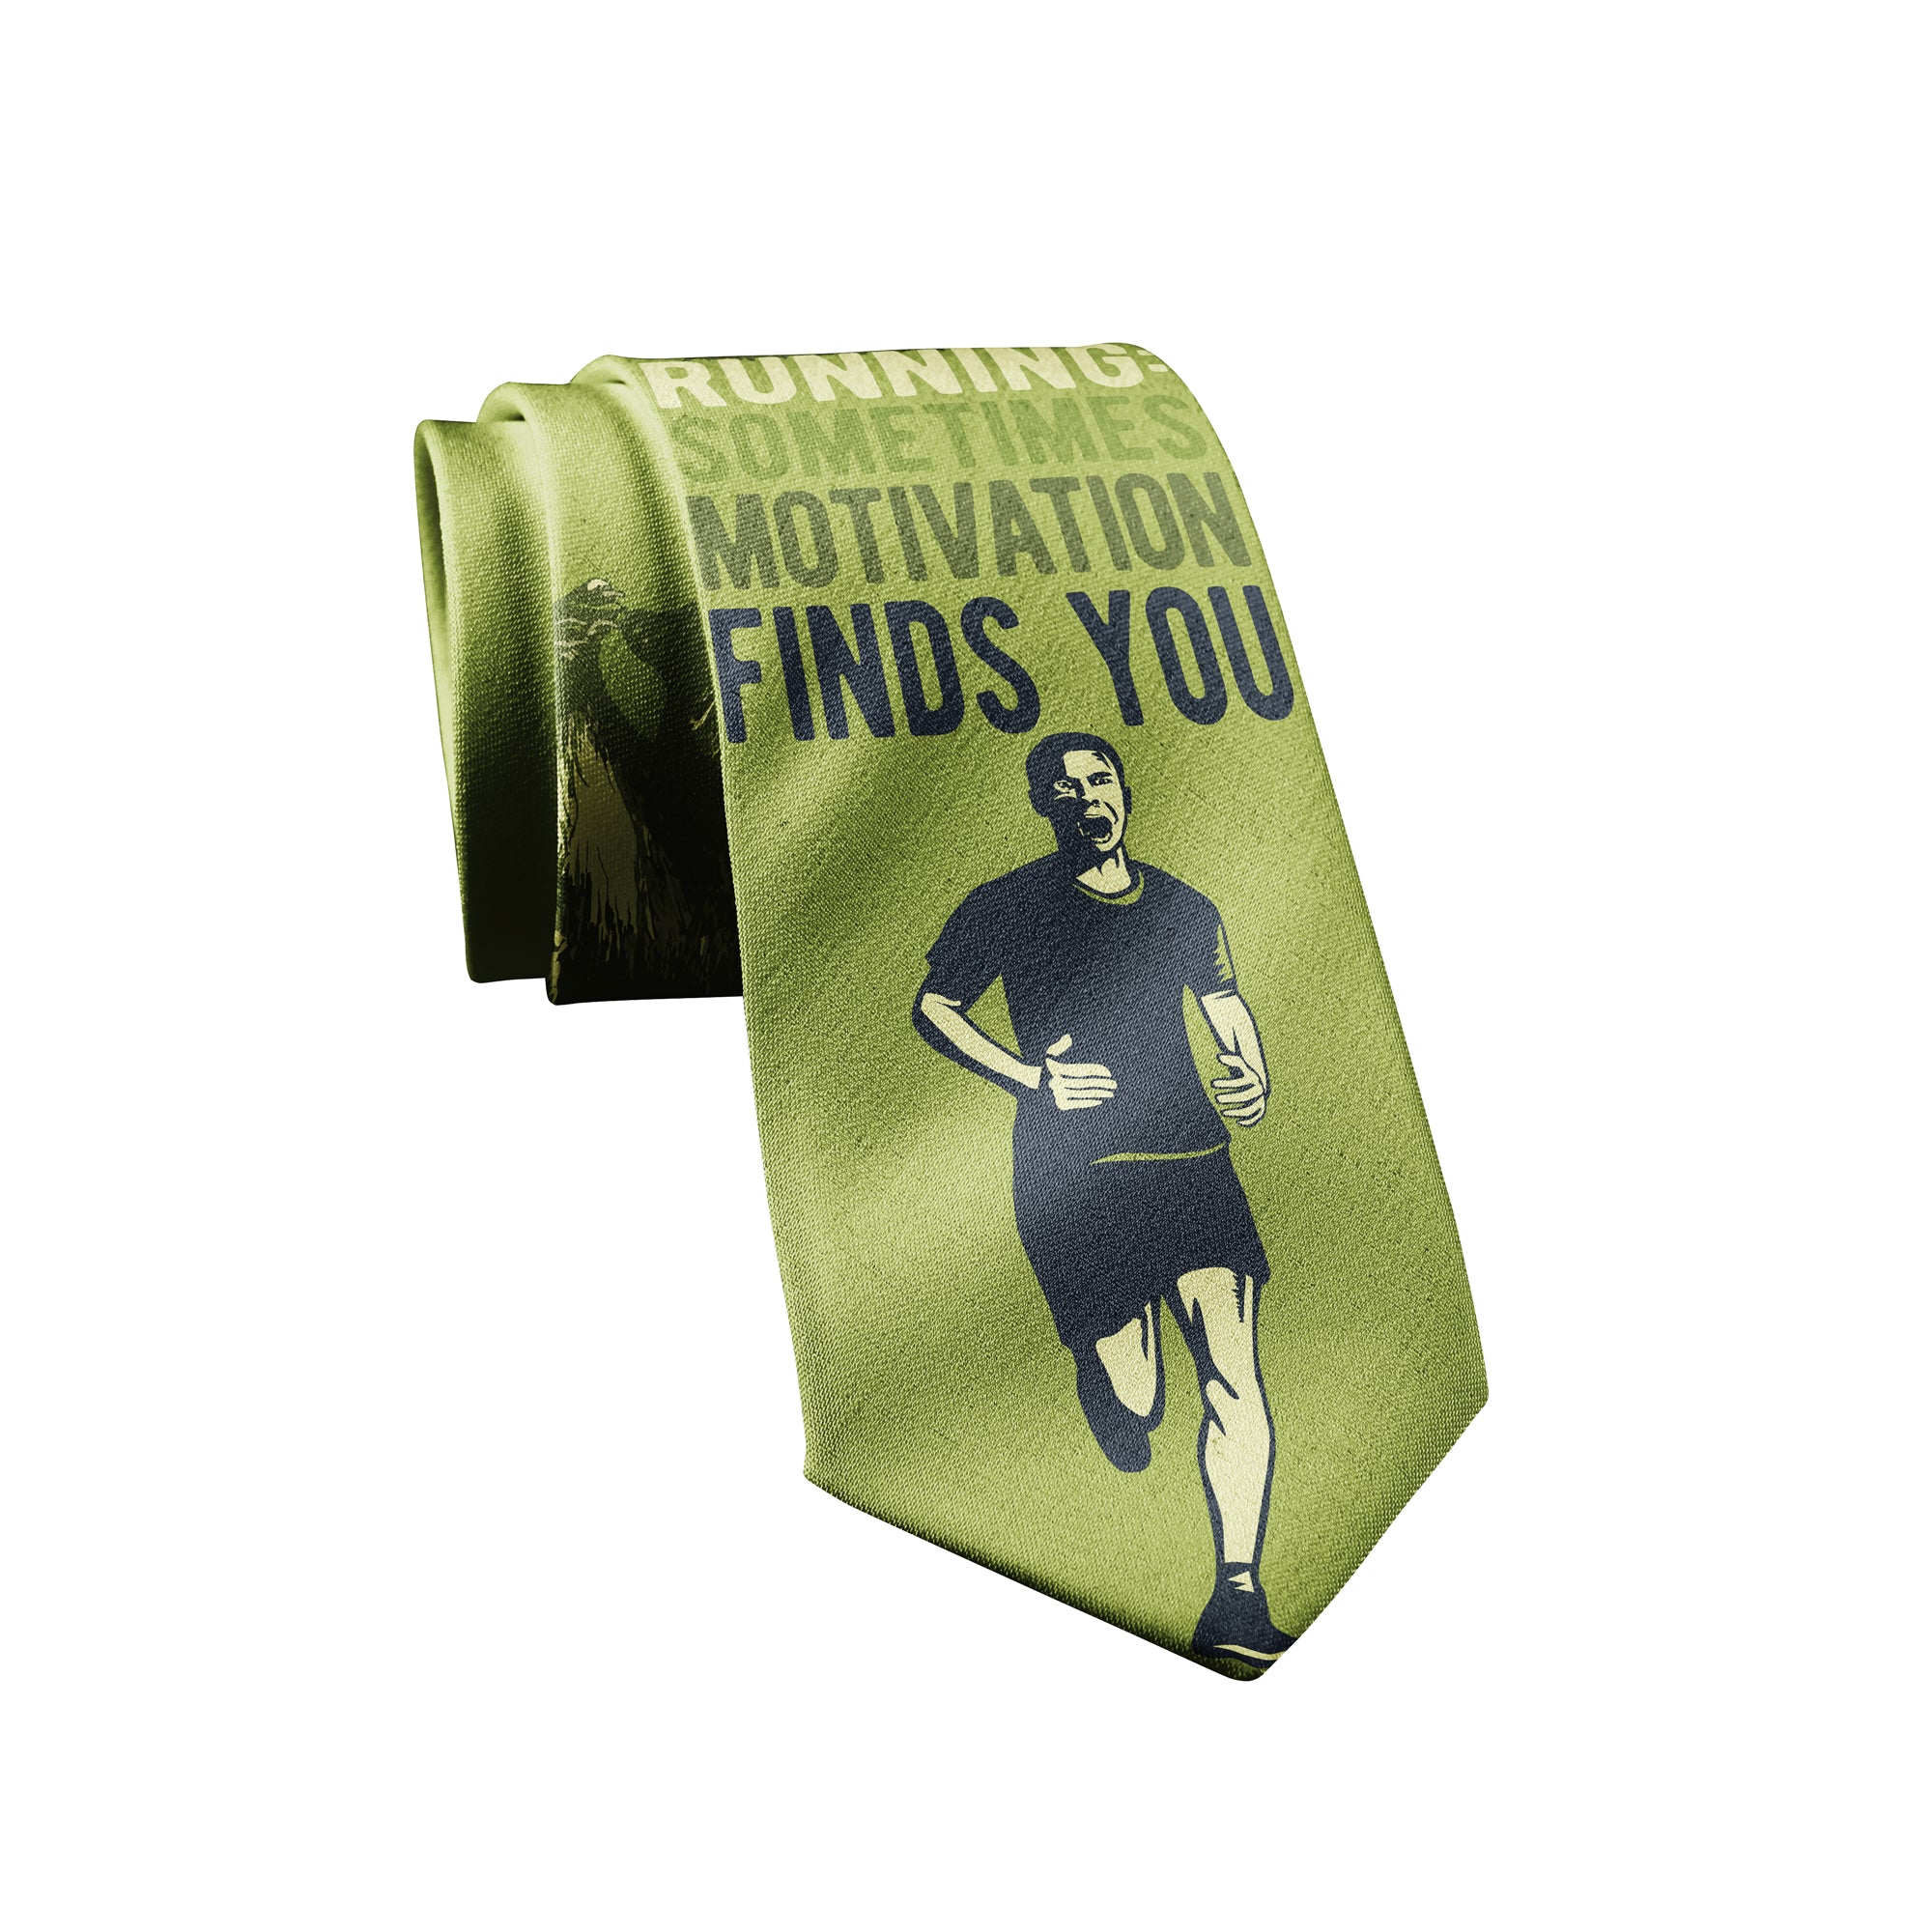 Funny Running Bear Running: Sometimes Motivation Finds You Bear Neck Tie Nerdy Father's Day Camping Fitness Tee